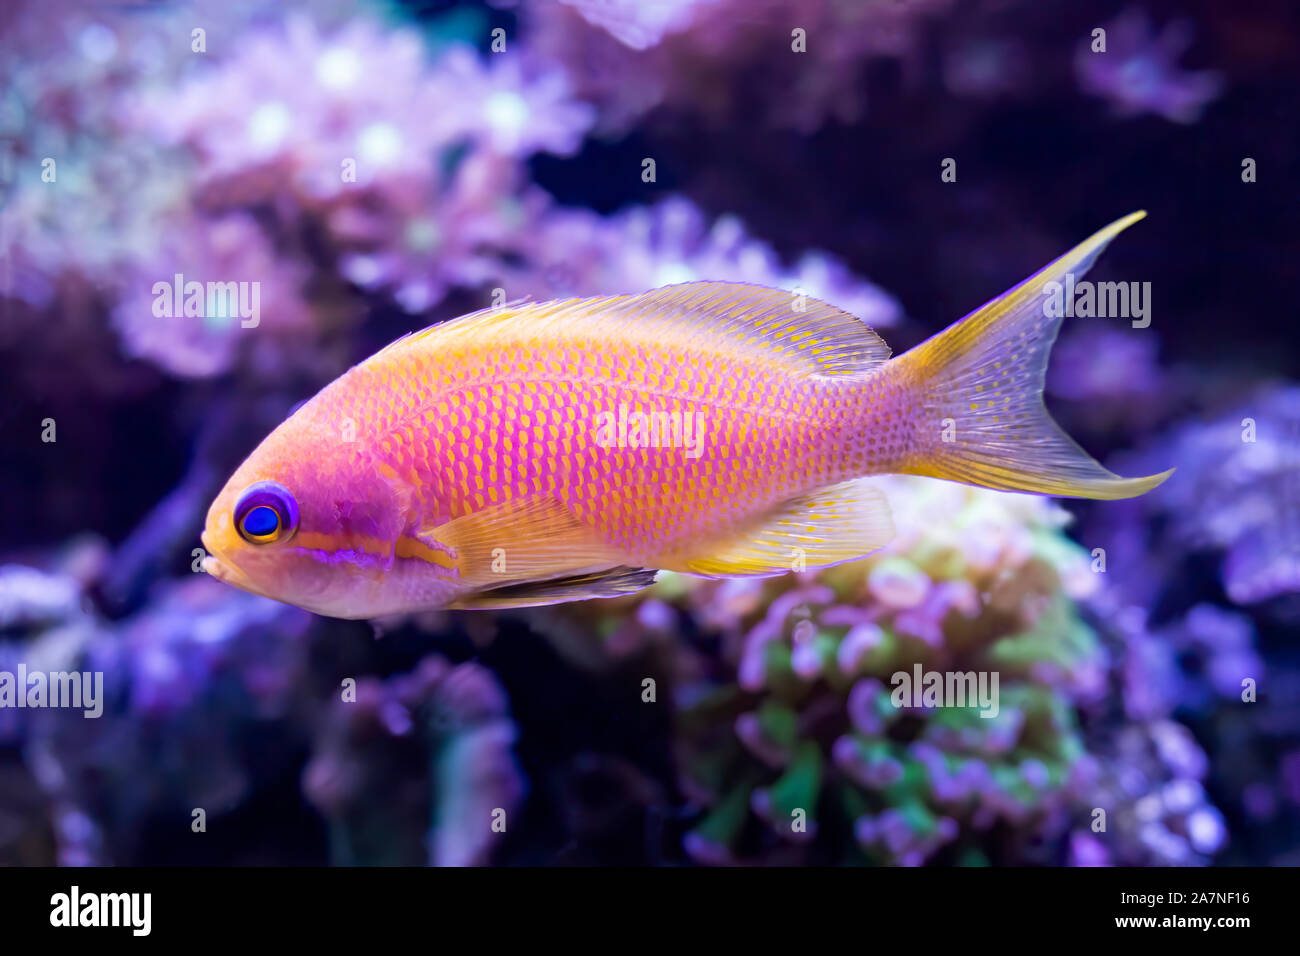 Closeup detail of blue eyed anthias tropical fish in aquarium with corals.  Image details fins tail and eyes of pink and yellow fish. Stock Photo